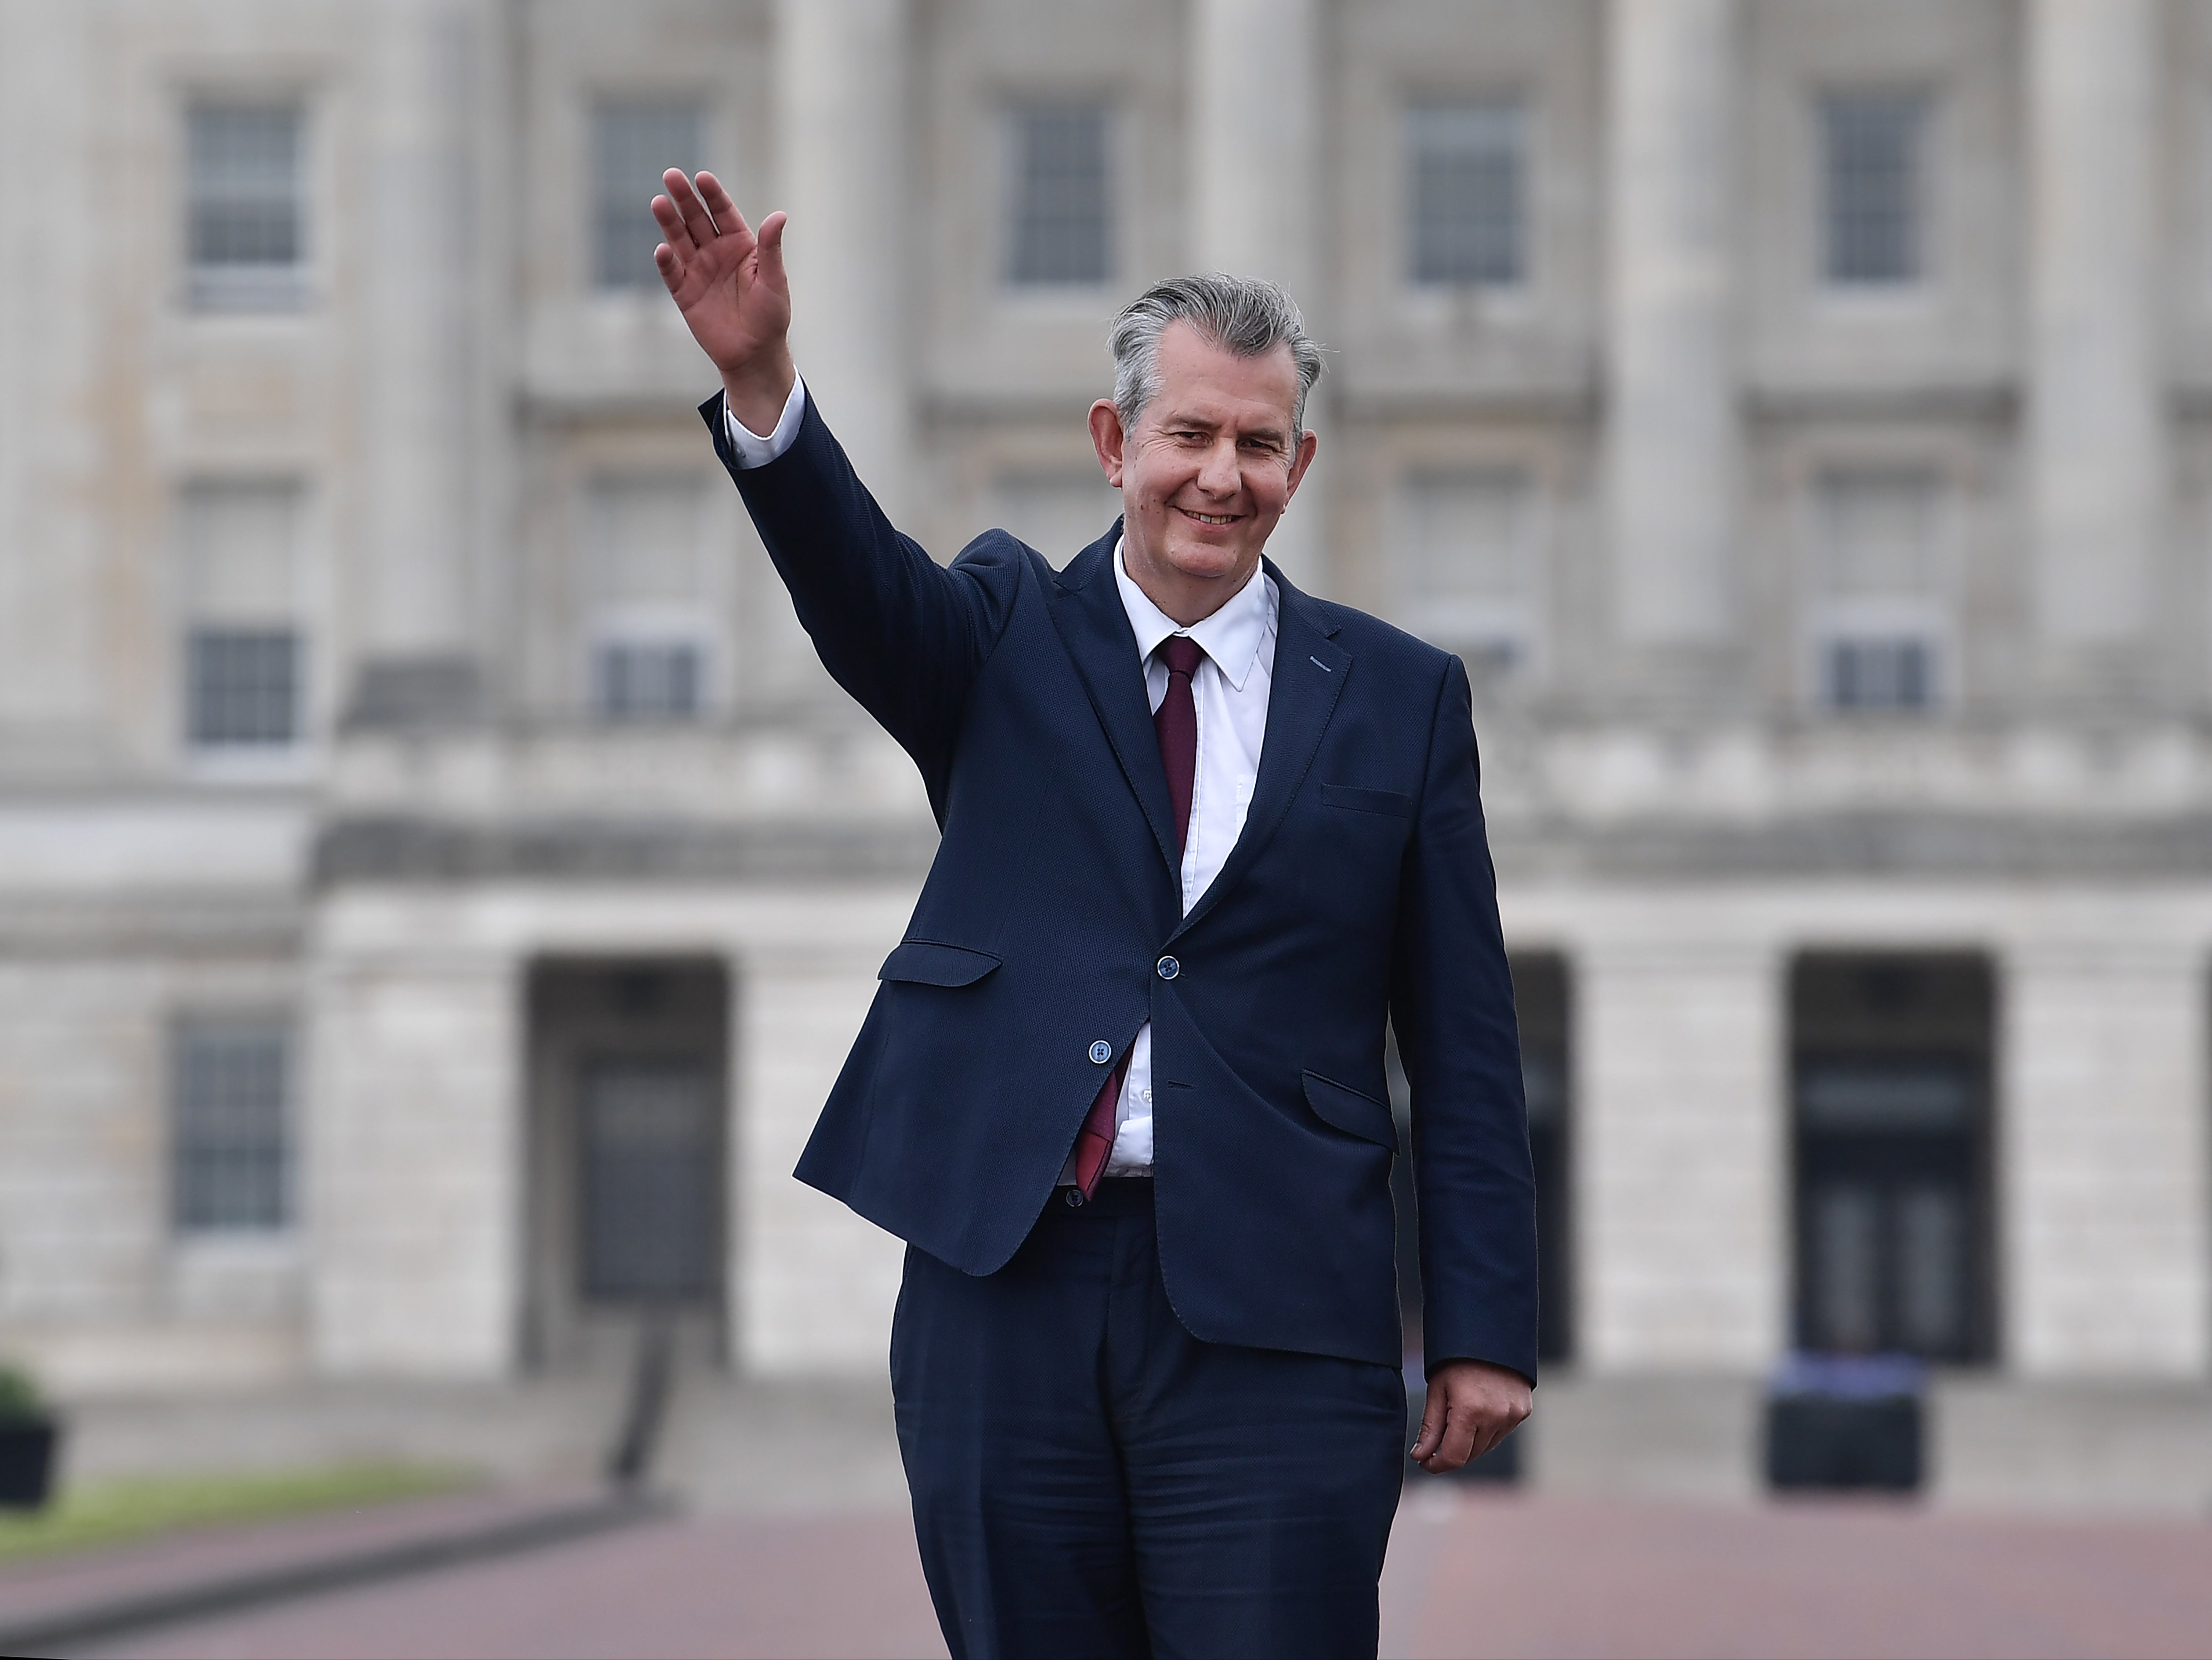 <p>Edwin Poots, the recently elected leader of the DUP</p>